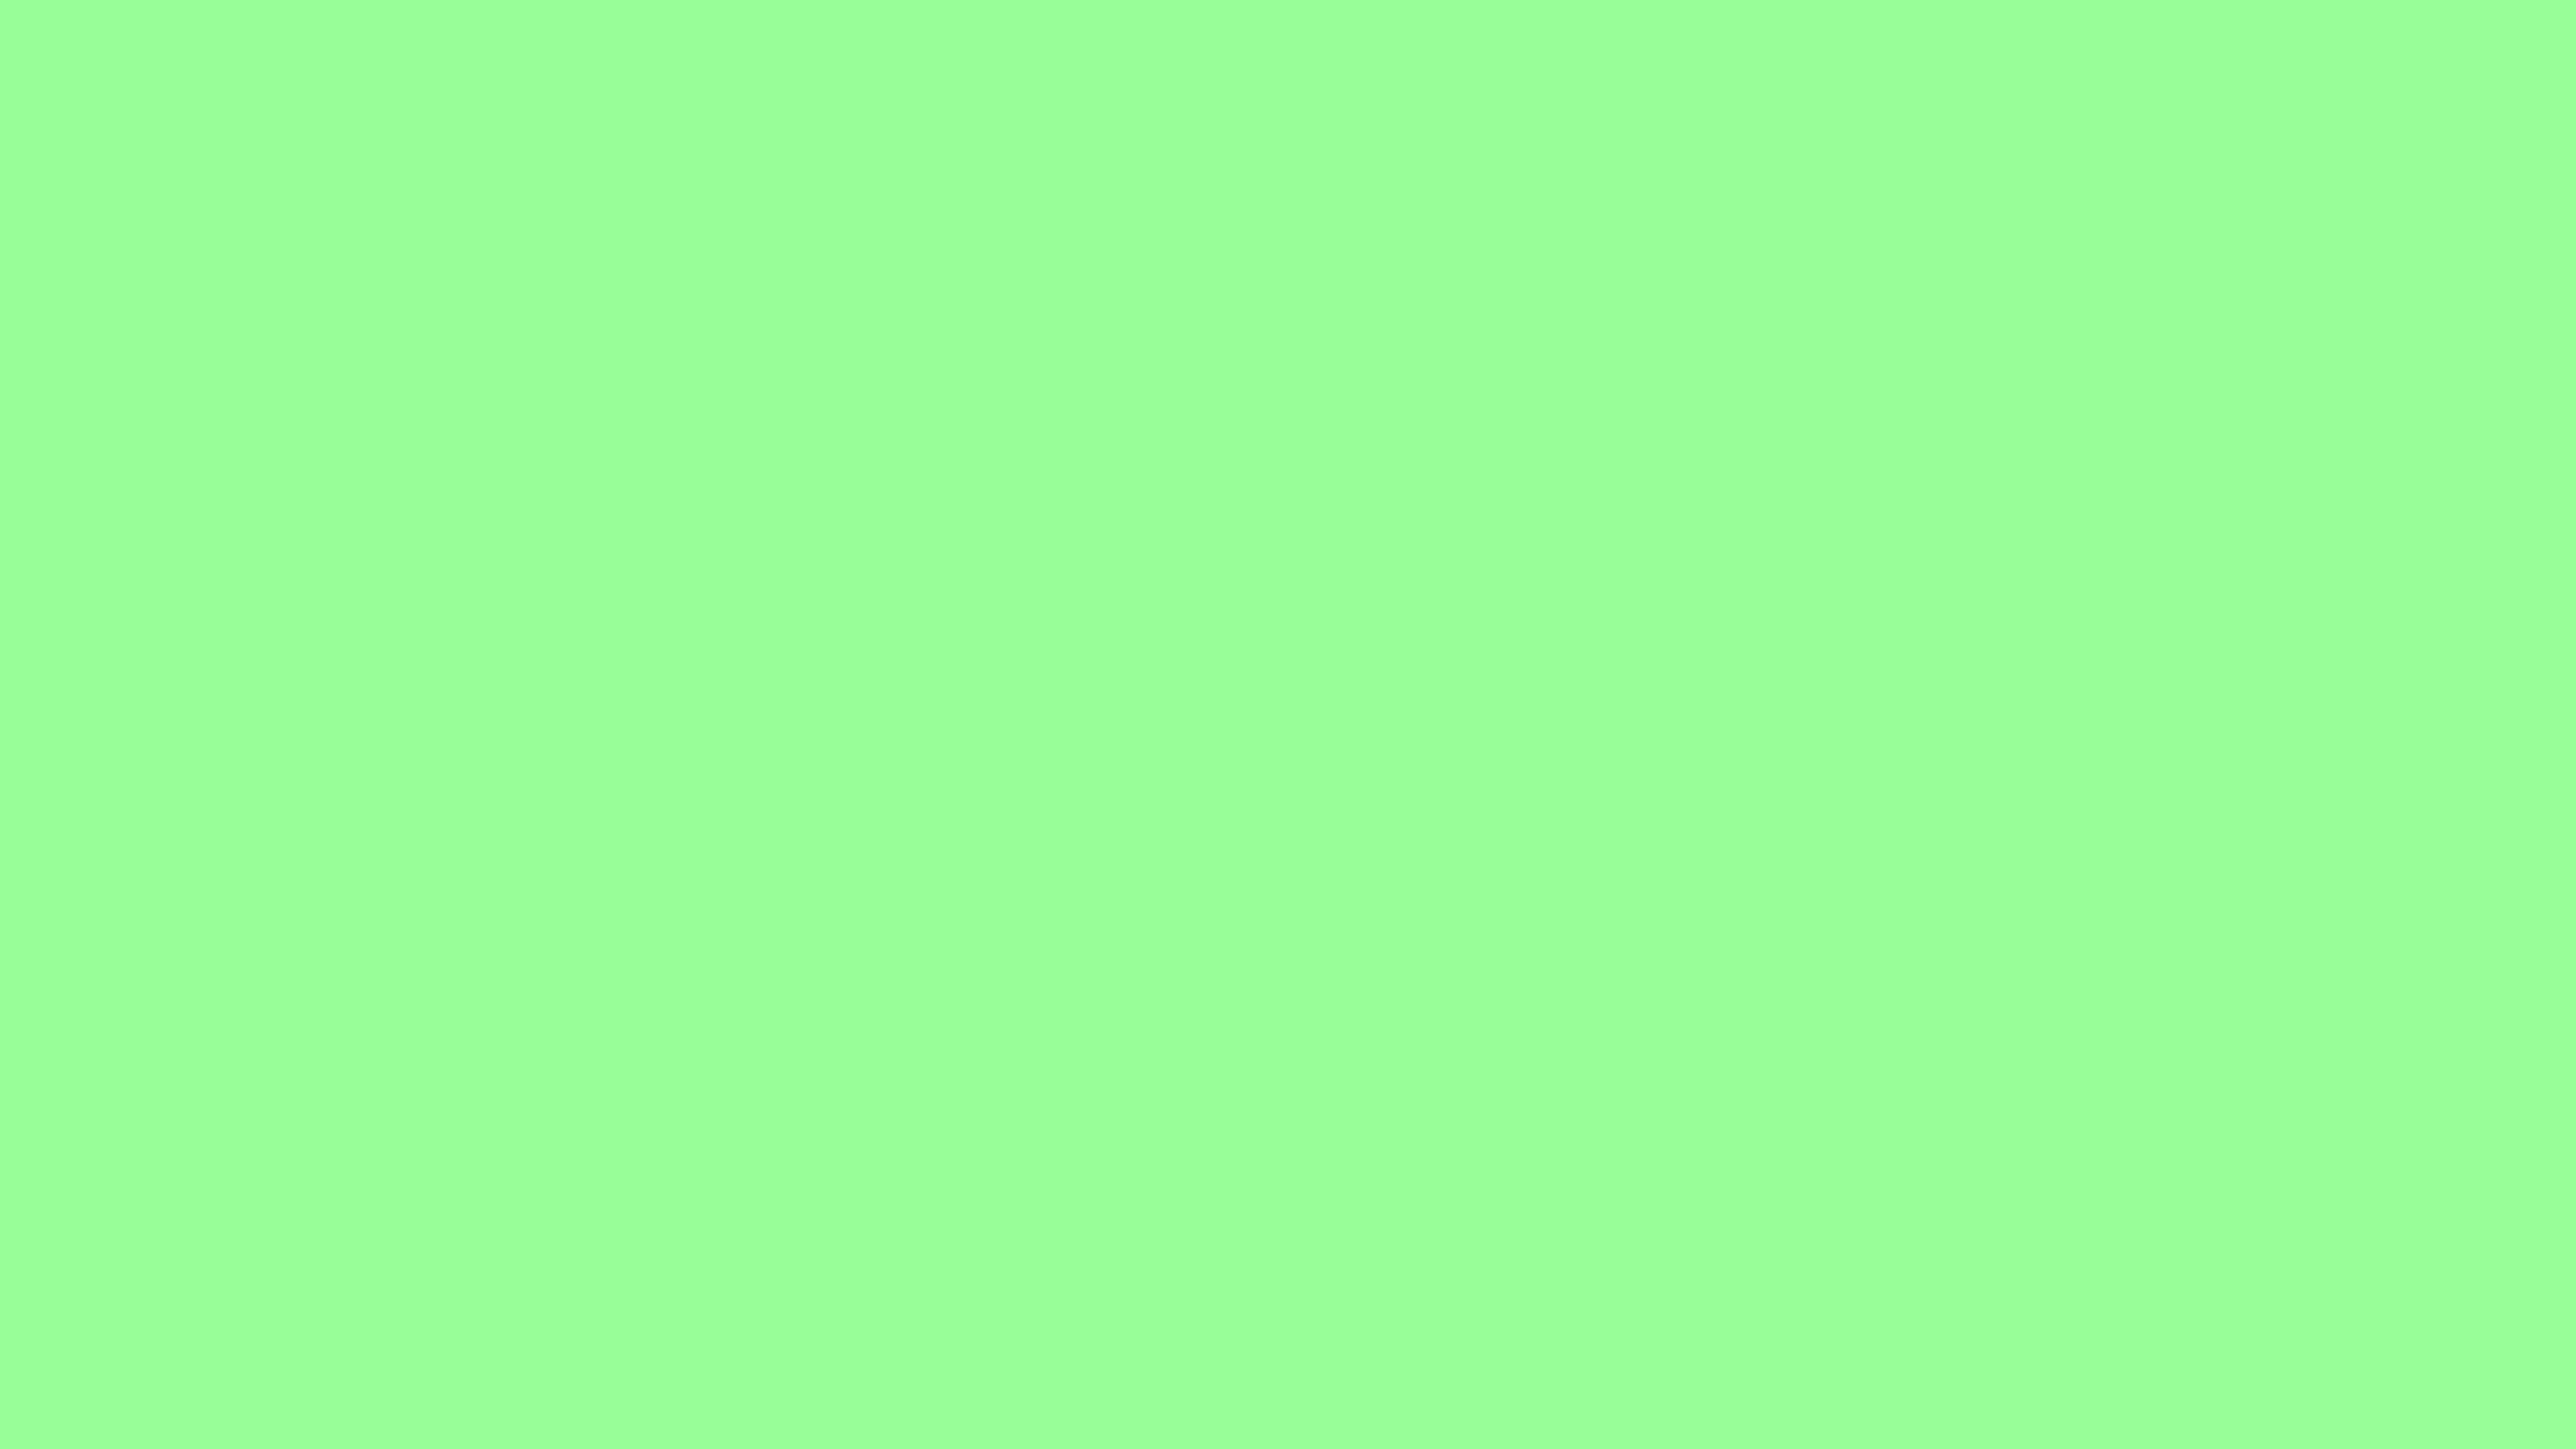 4096x2304 Mint Green Solid Color Background